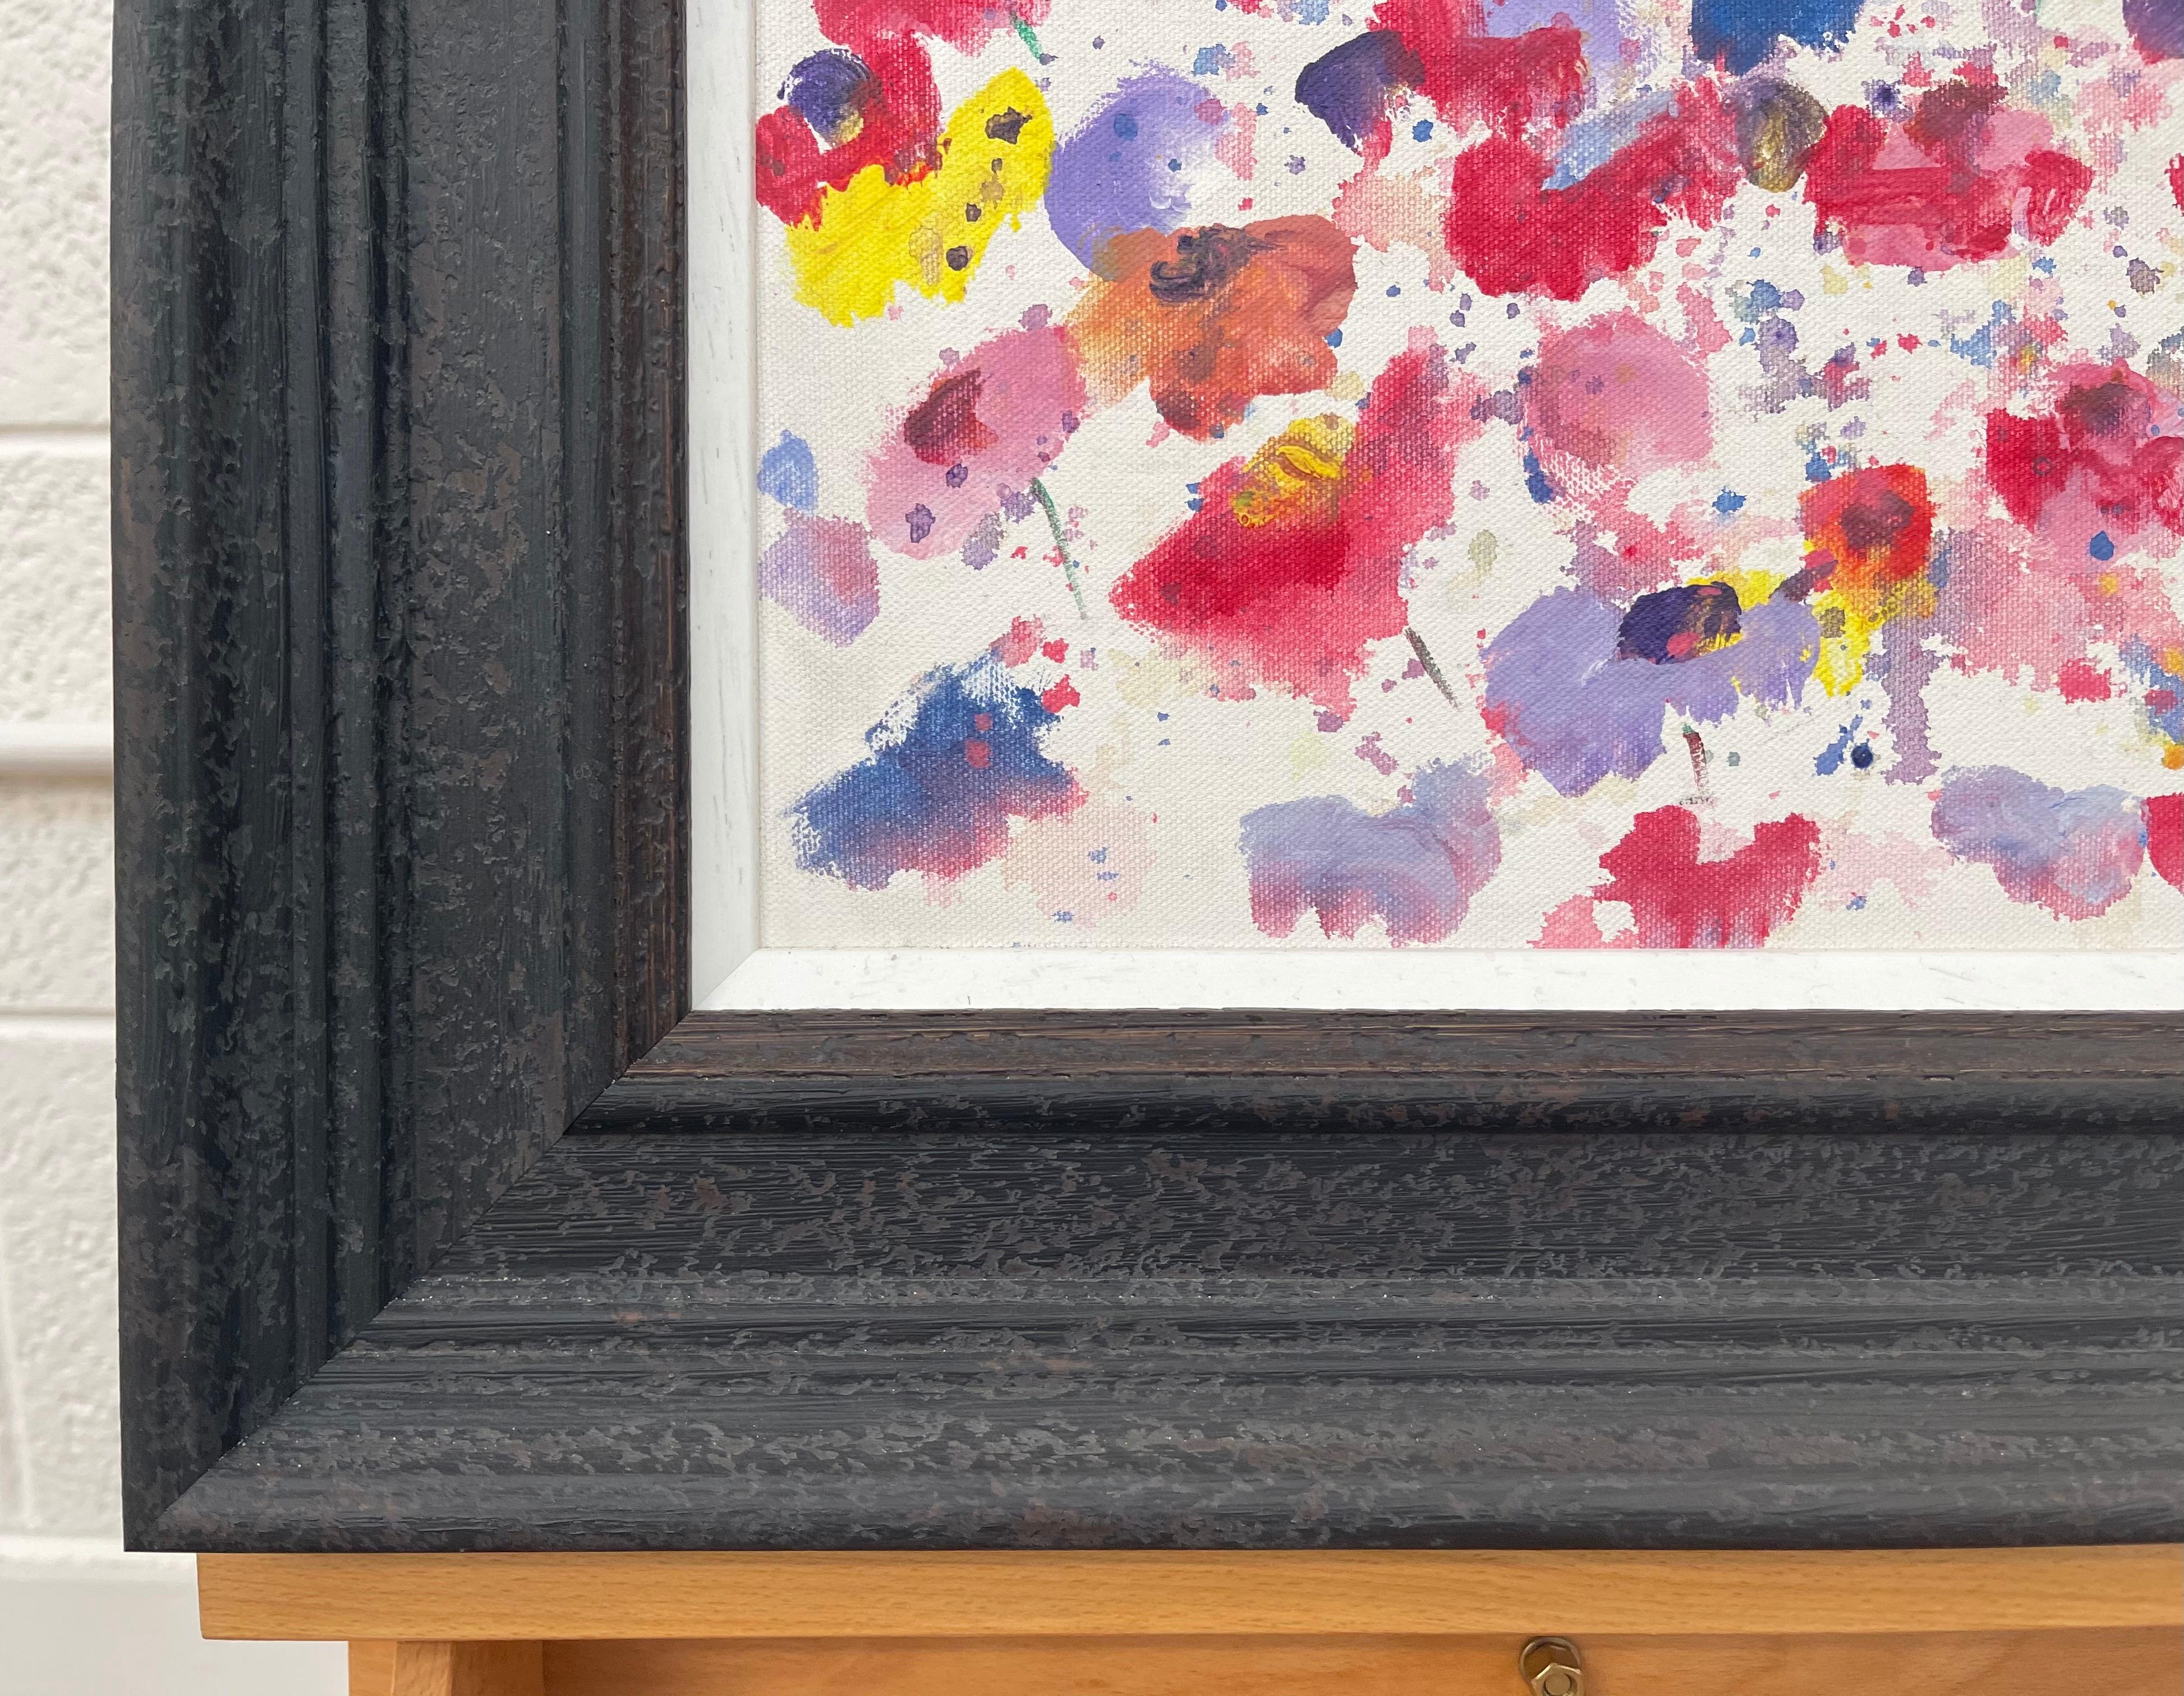 Painting of Abstract Red, Blue & Yellow Wild Flowers on a White Background by British Contemporary Artist, Angela Wakefield. This original is from the 'Spring Burst' Interior Design Series. Framed in a high quality off-black contemporary wooden